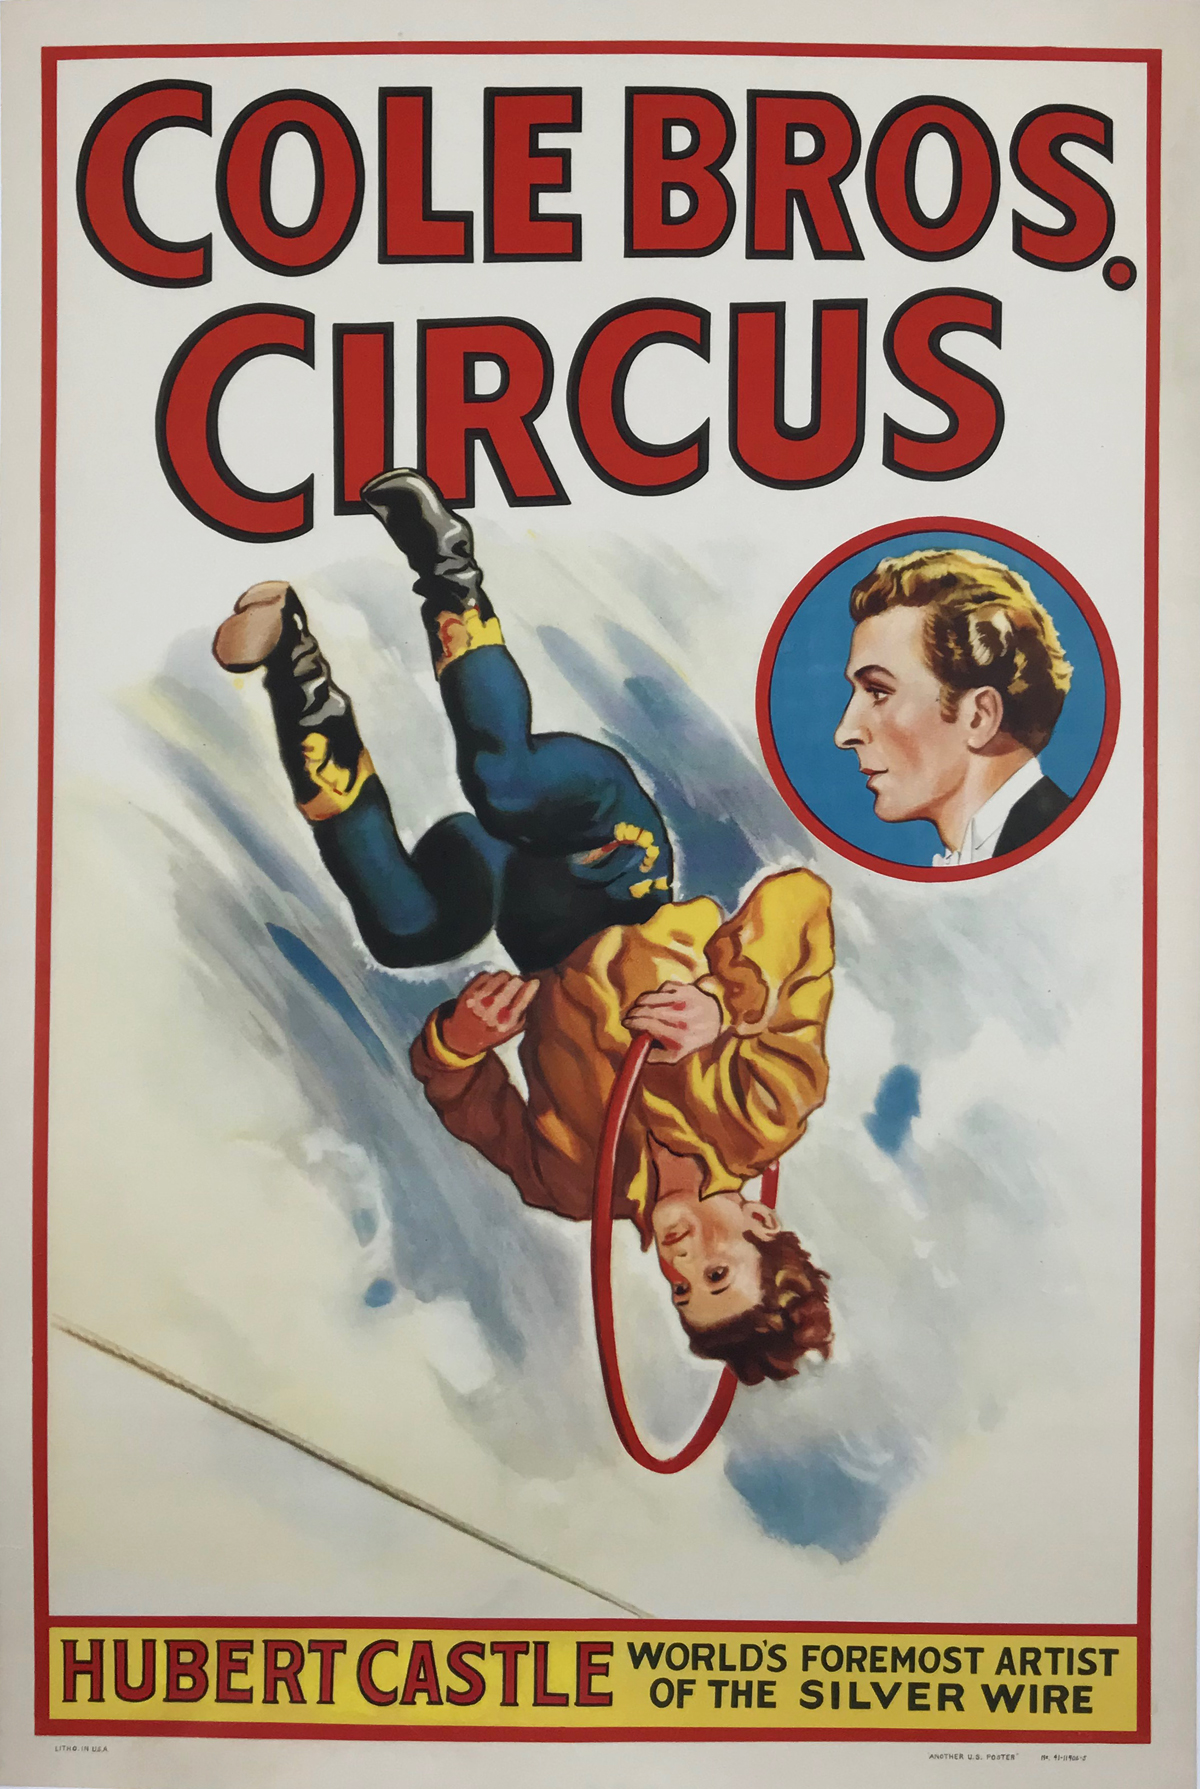 Cole Bros Circus Hubert Castle Original 1941 Vintage American Circus Advertisement Offset Lithograph Poster Linen Backed. 